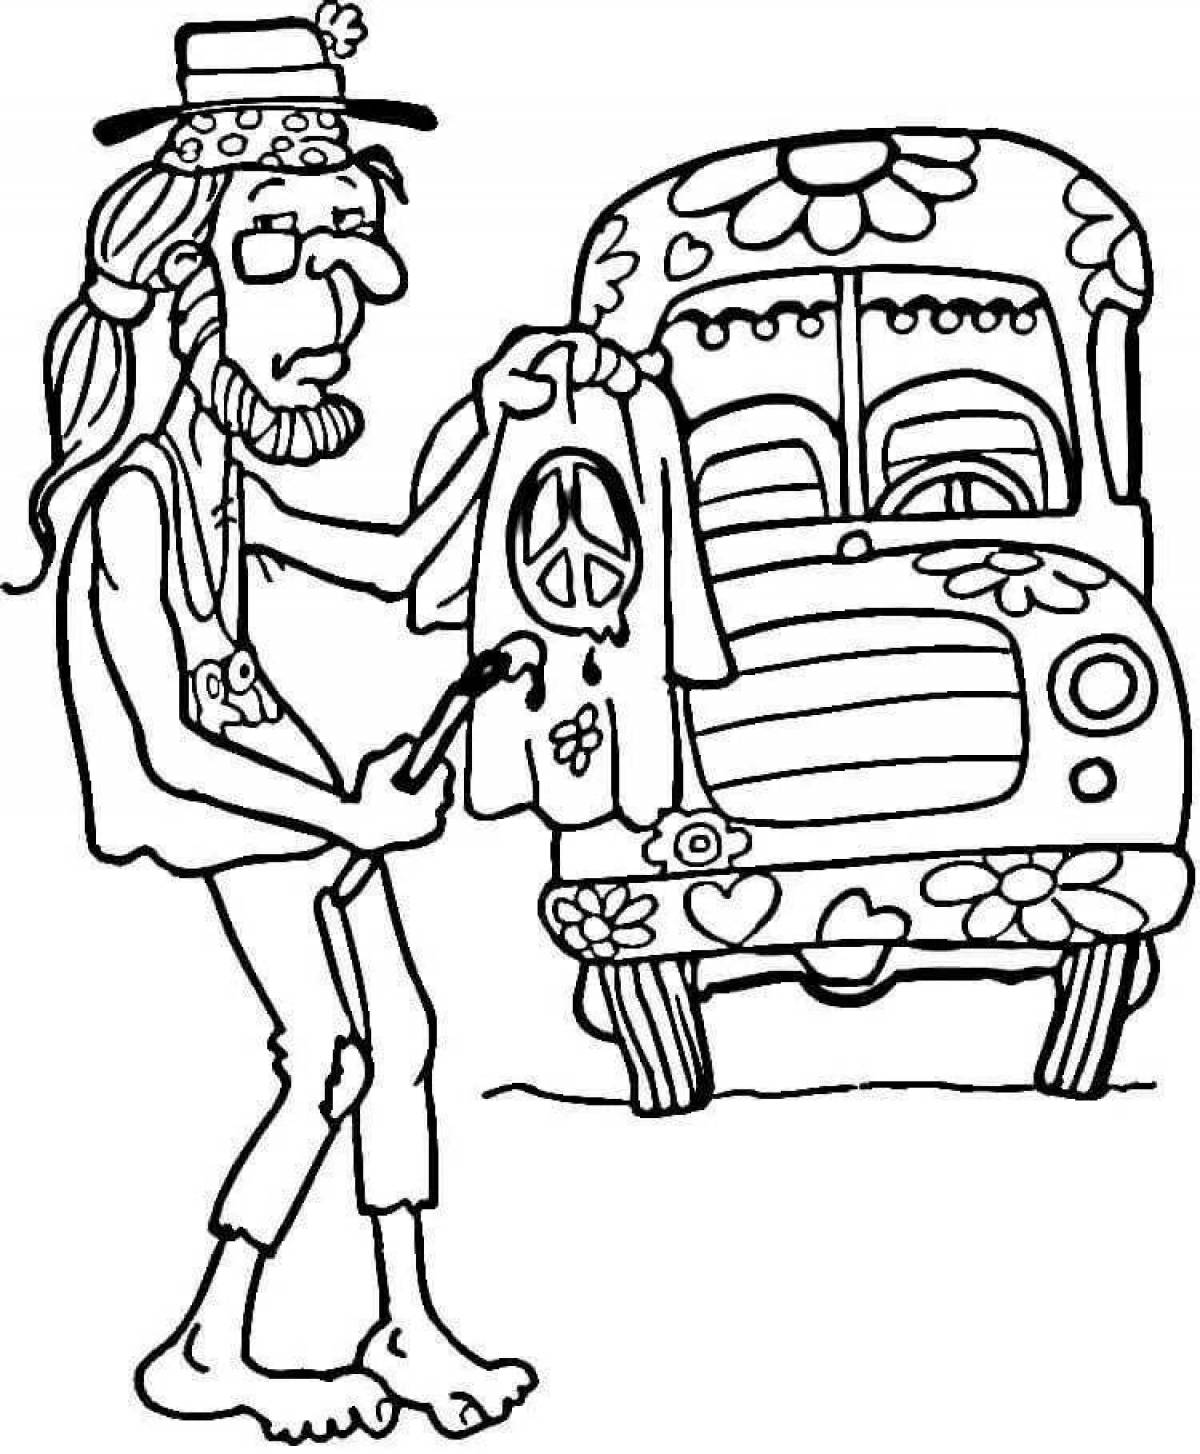 Colorful hippie coloring page